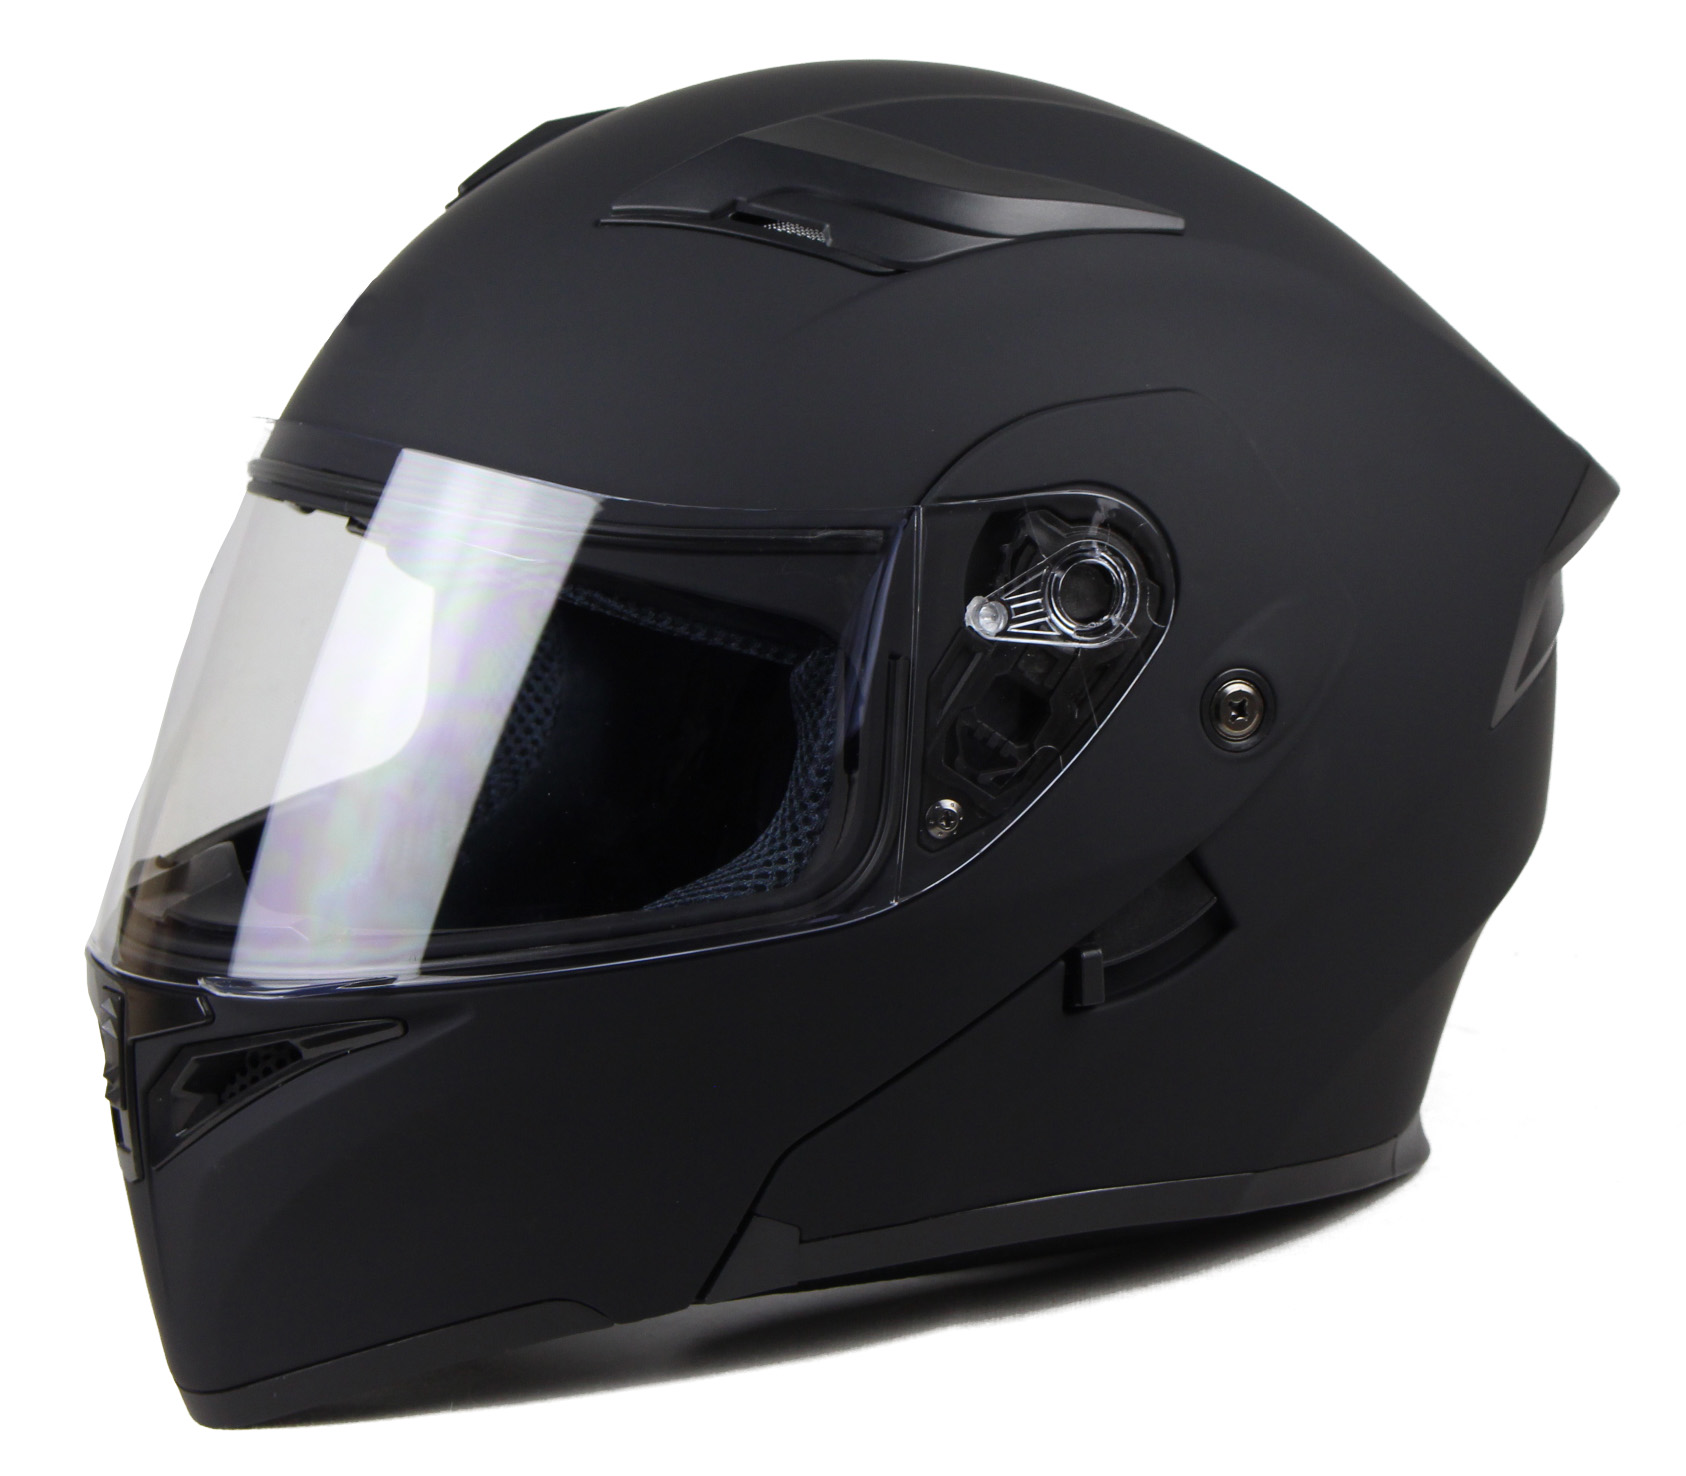 Stylish Dirt Bike Helmet for Women: Find the Perfect Pink Option